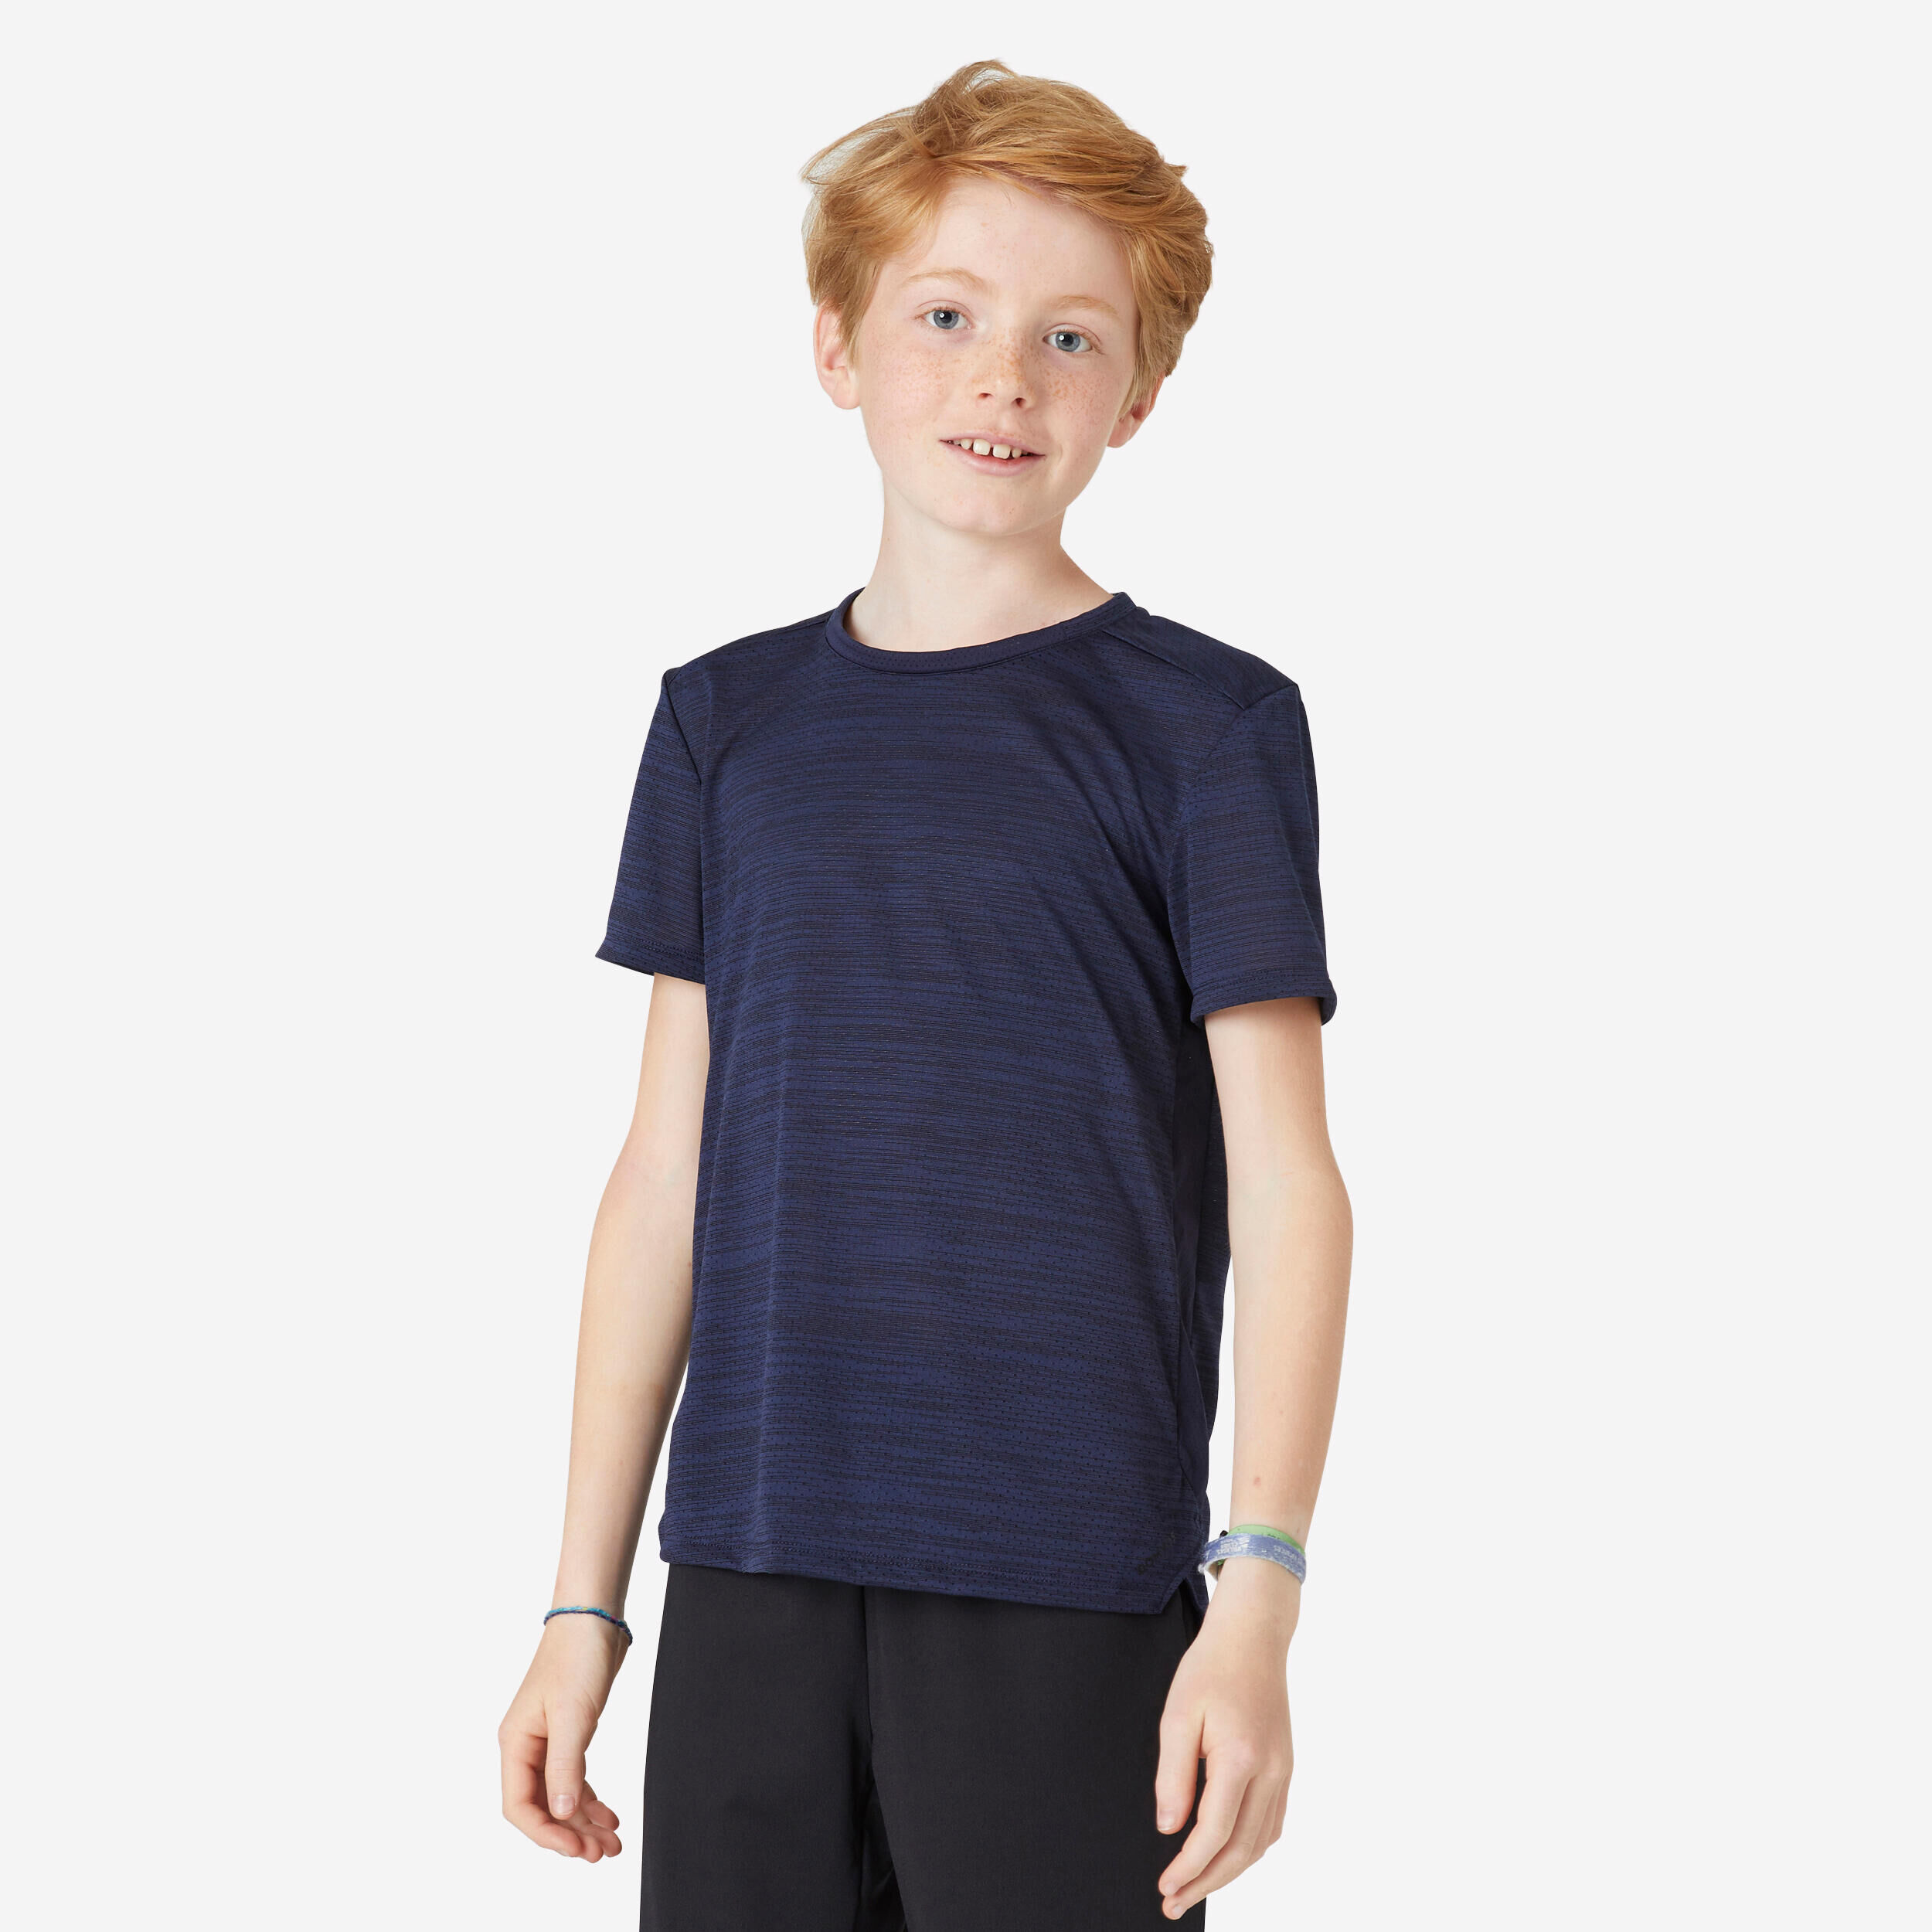 DOMYOS Kids' Synthetic Breathable T-Shirt S500 - Navy